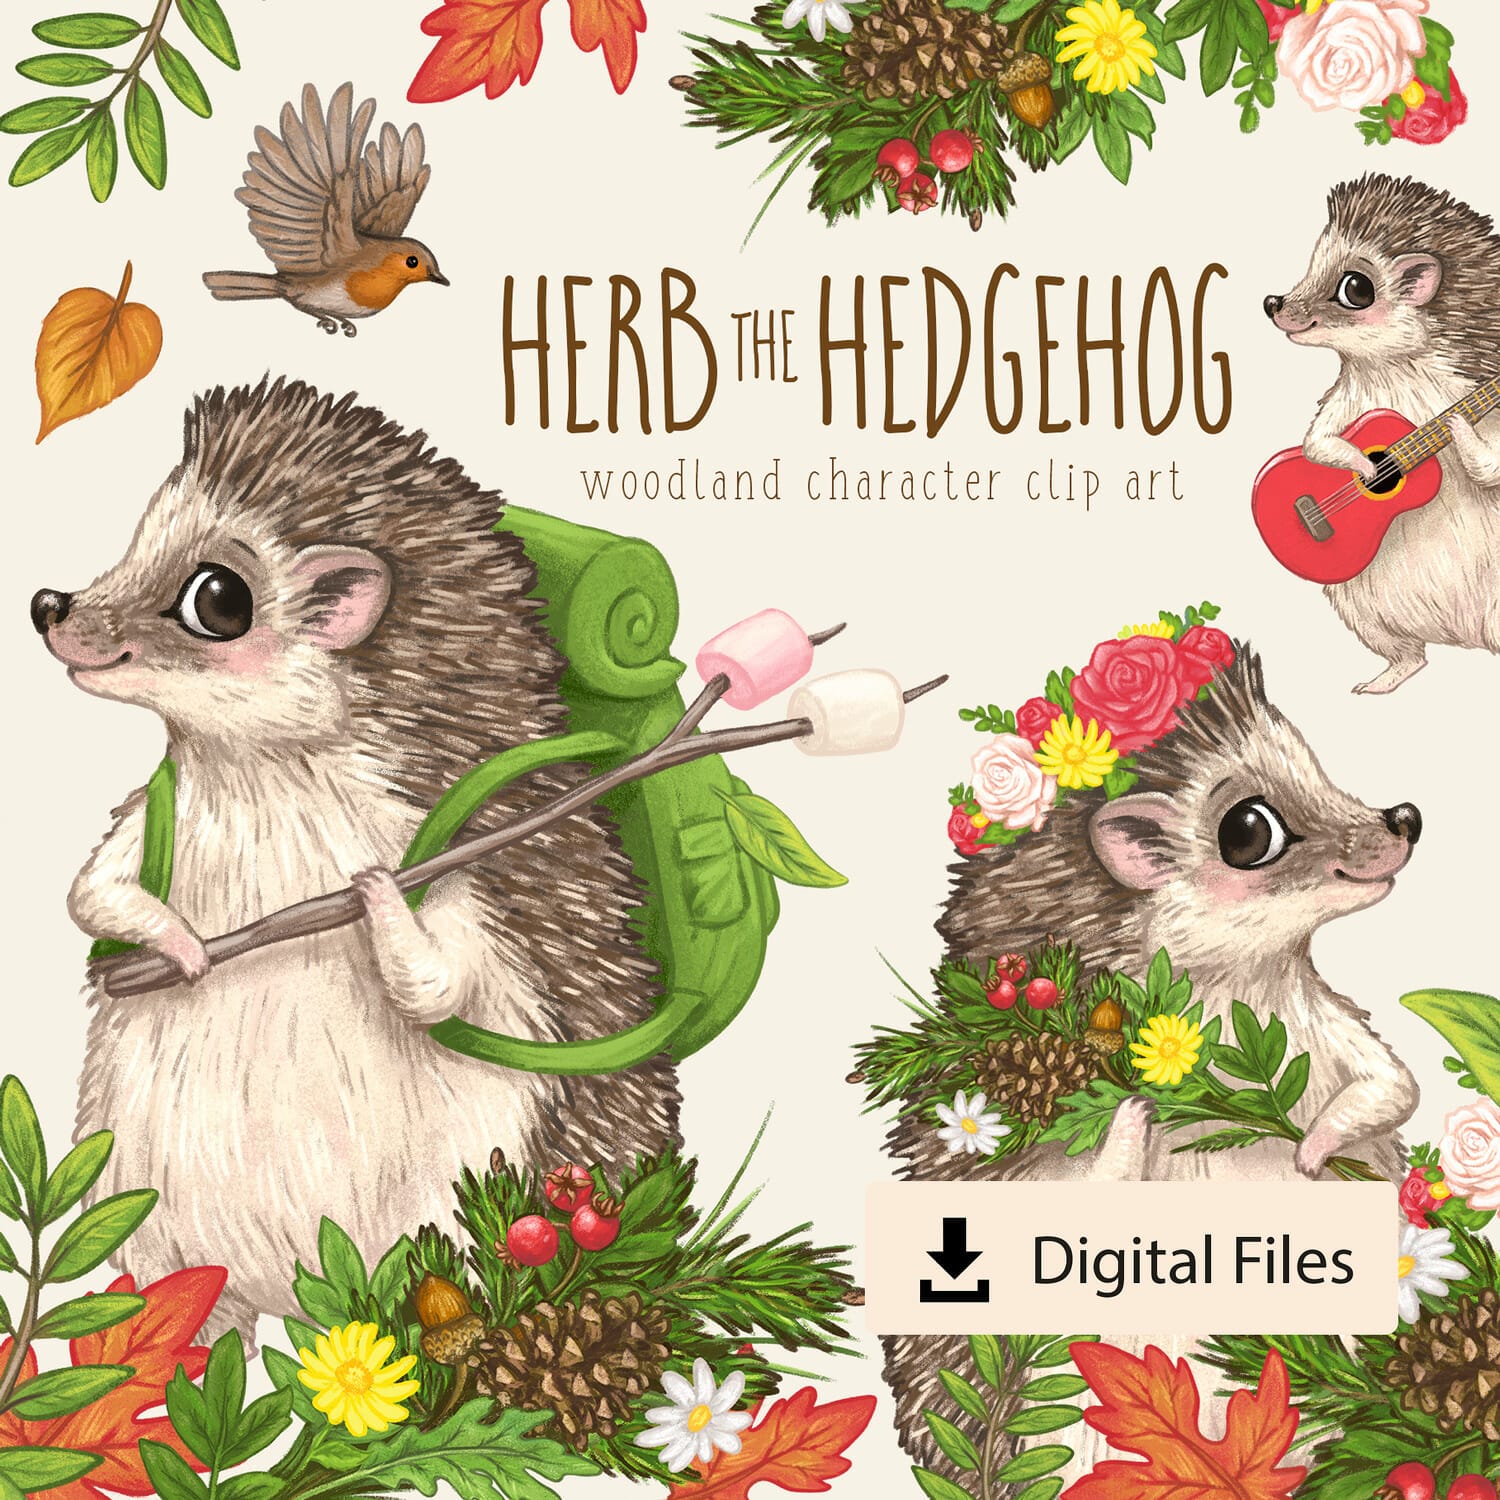 Woodland Characters - Herb the Hedgehog Clip Art 